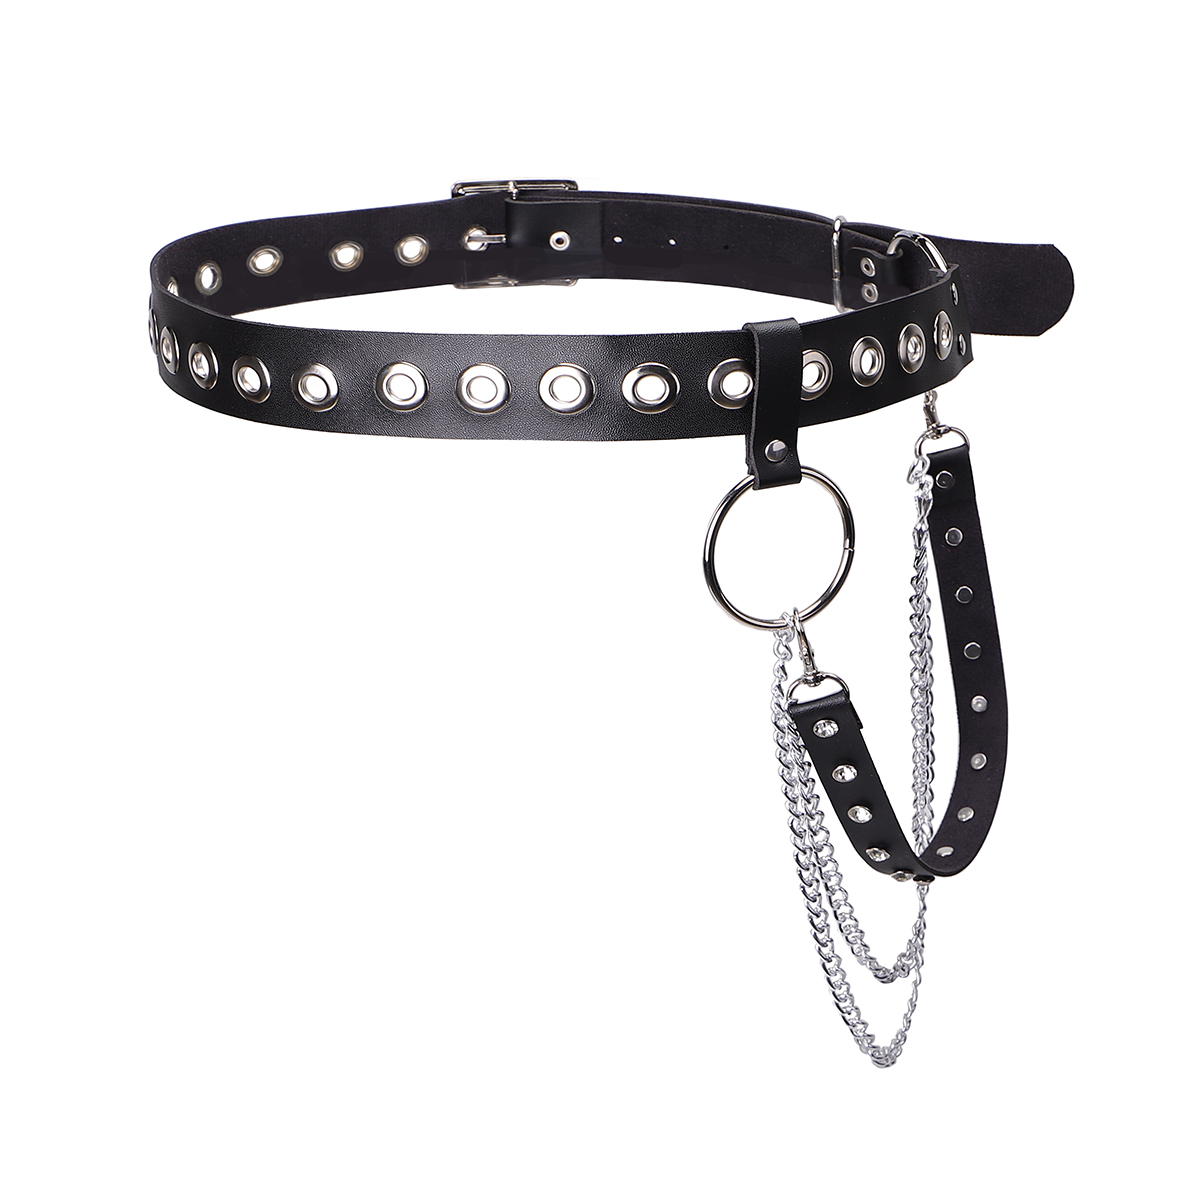 Fashion chain leather punk belt with silver O-ring and buckle